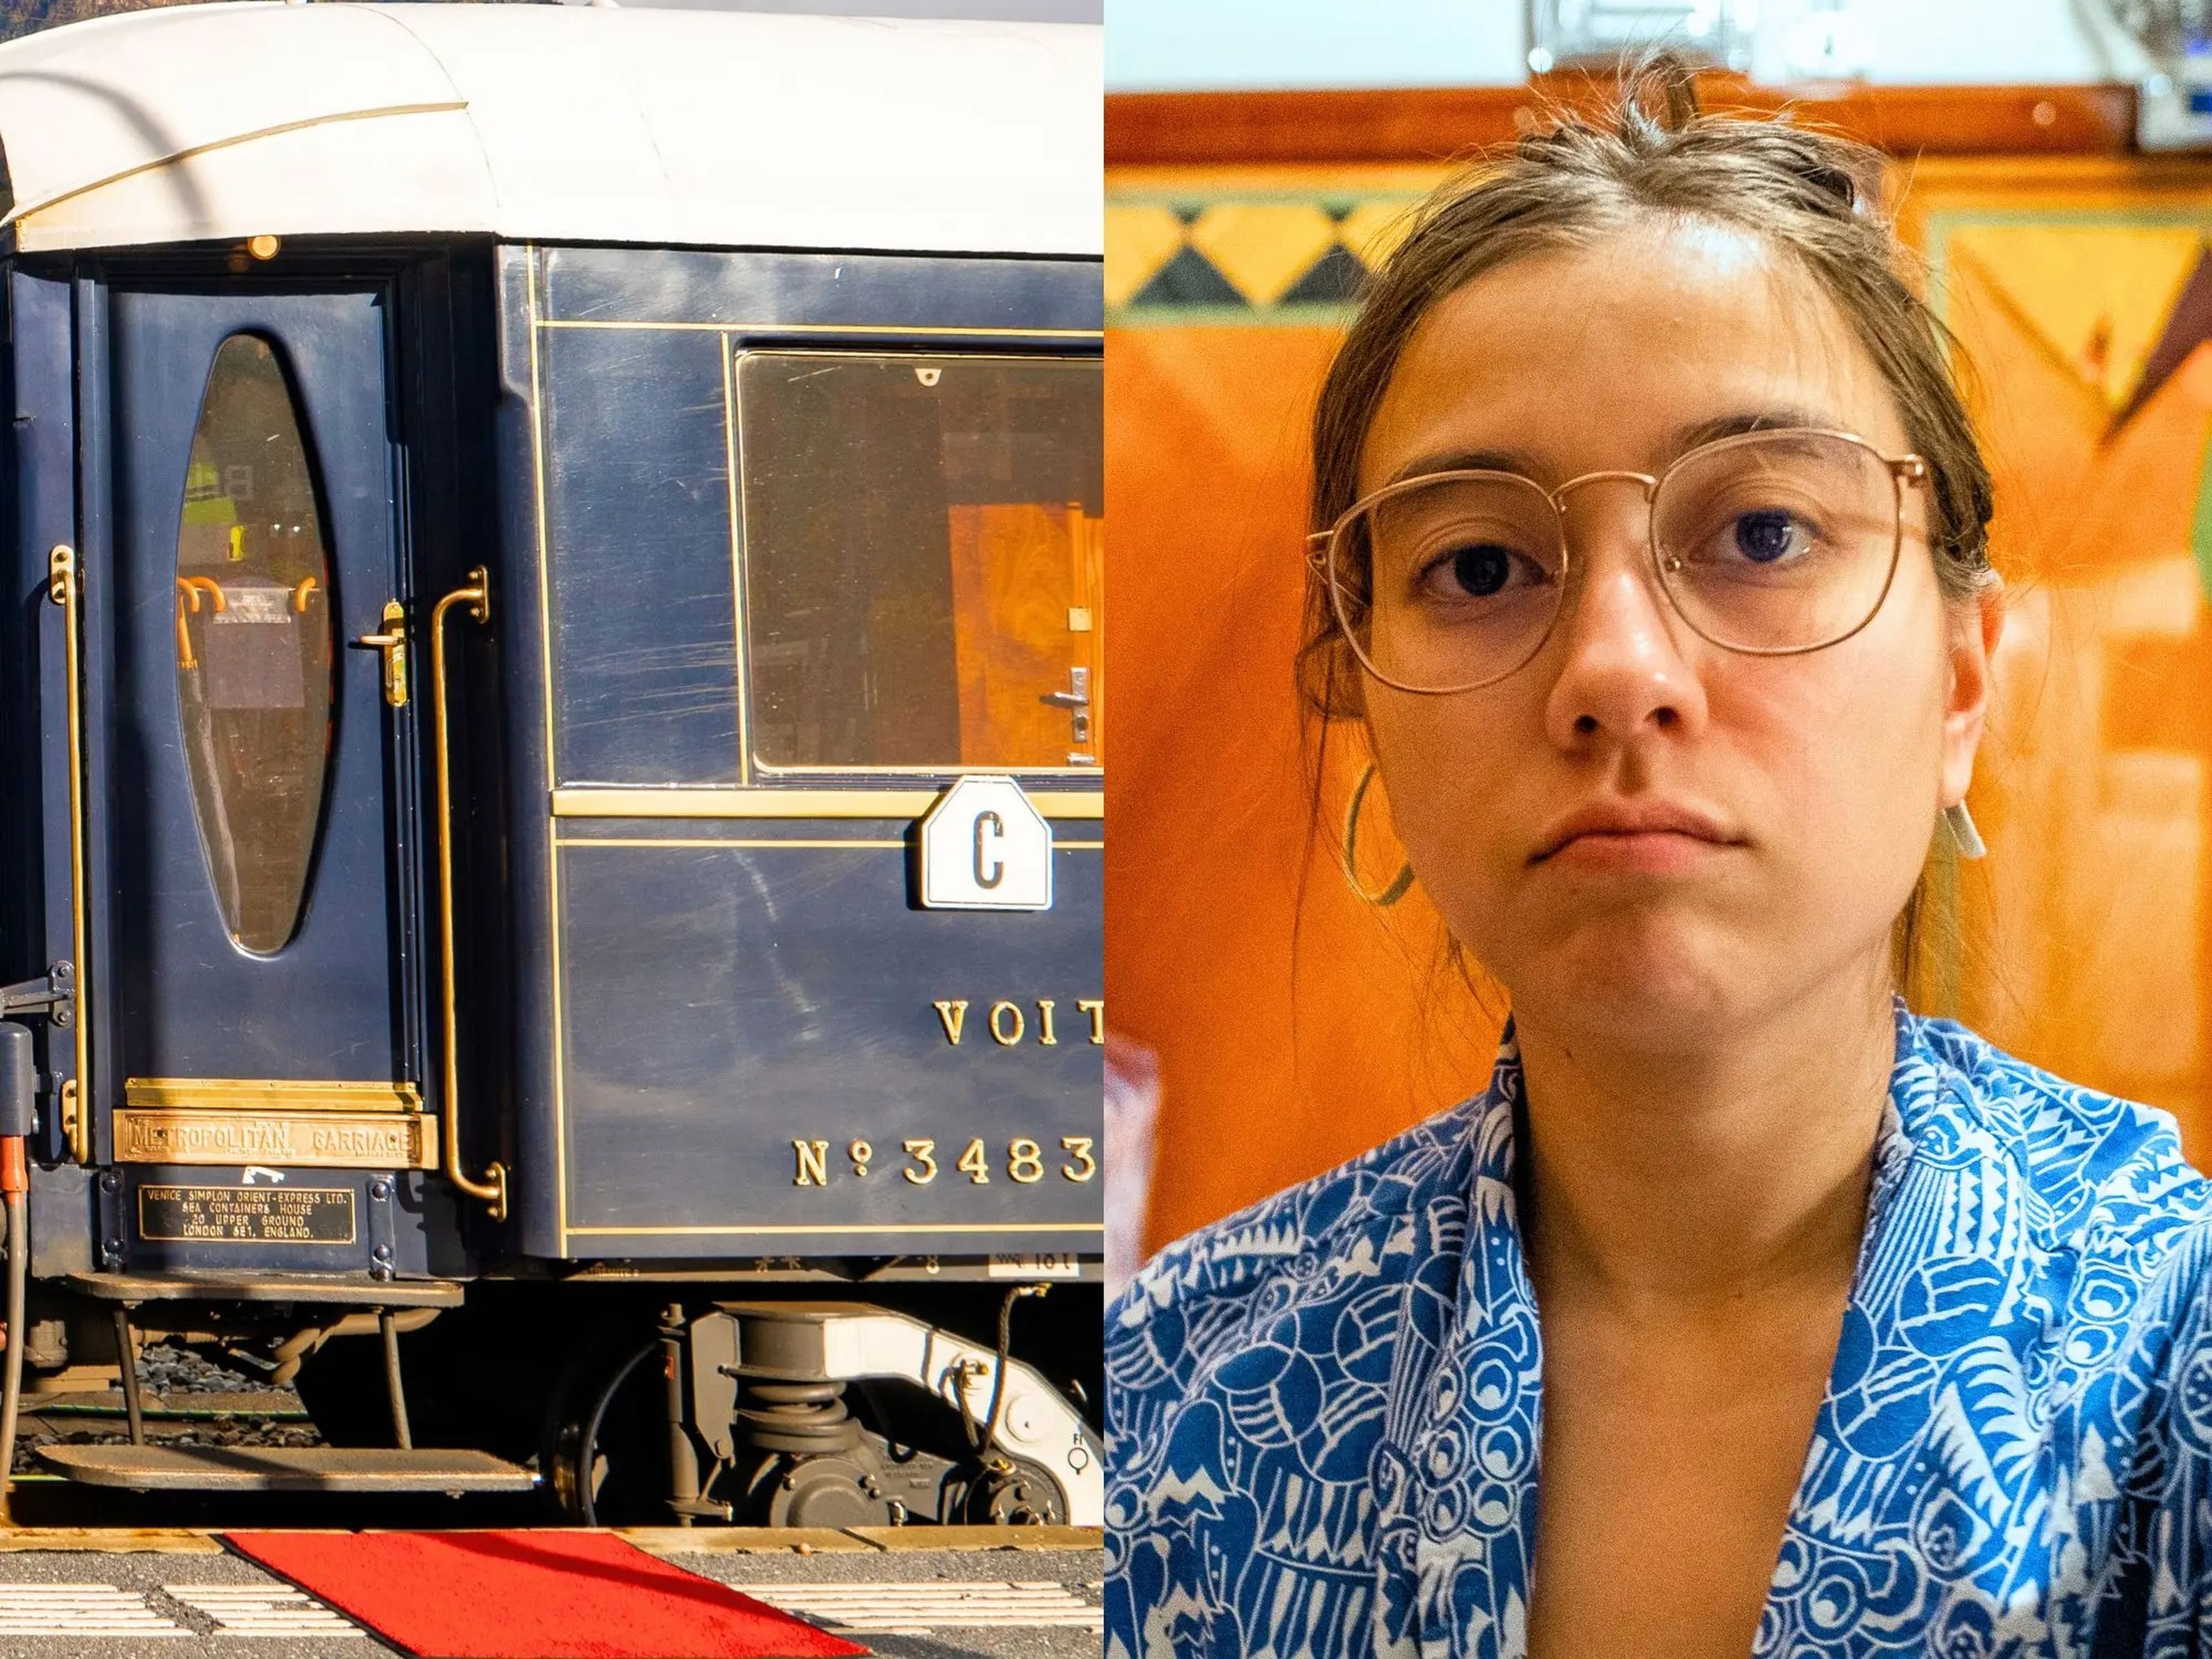 Left: A navy blue train with a red carpet in front of the door. Right: A close-up of the author in a train cabin with a blue robe on